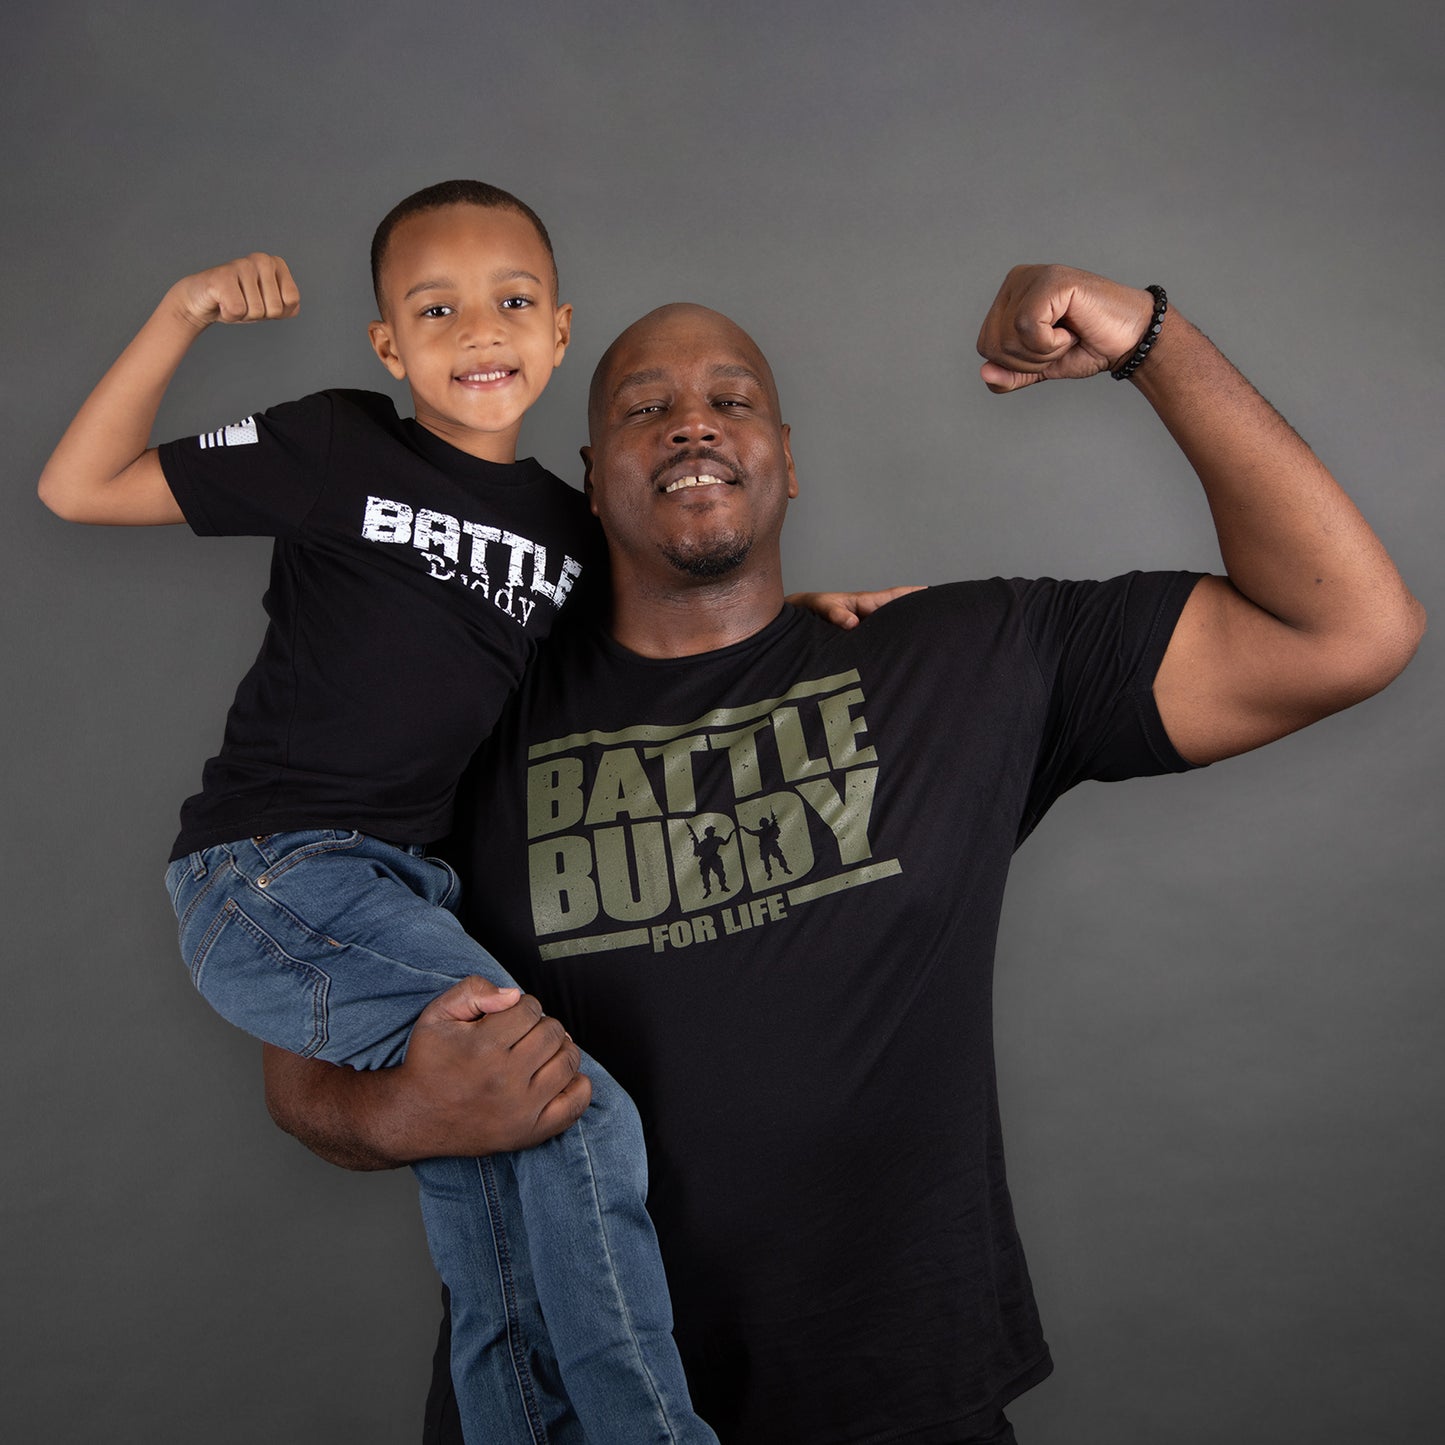 Patriotic T-Shirt - Battle Buddy for Life 